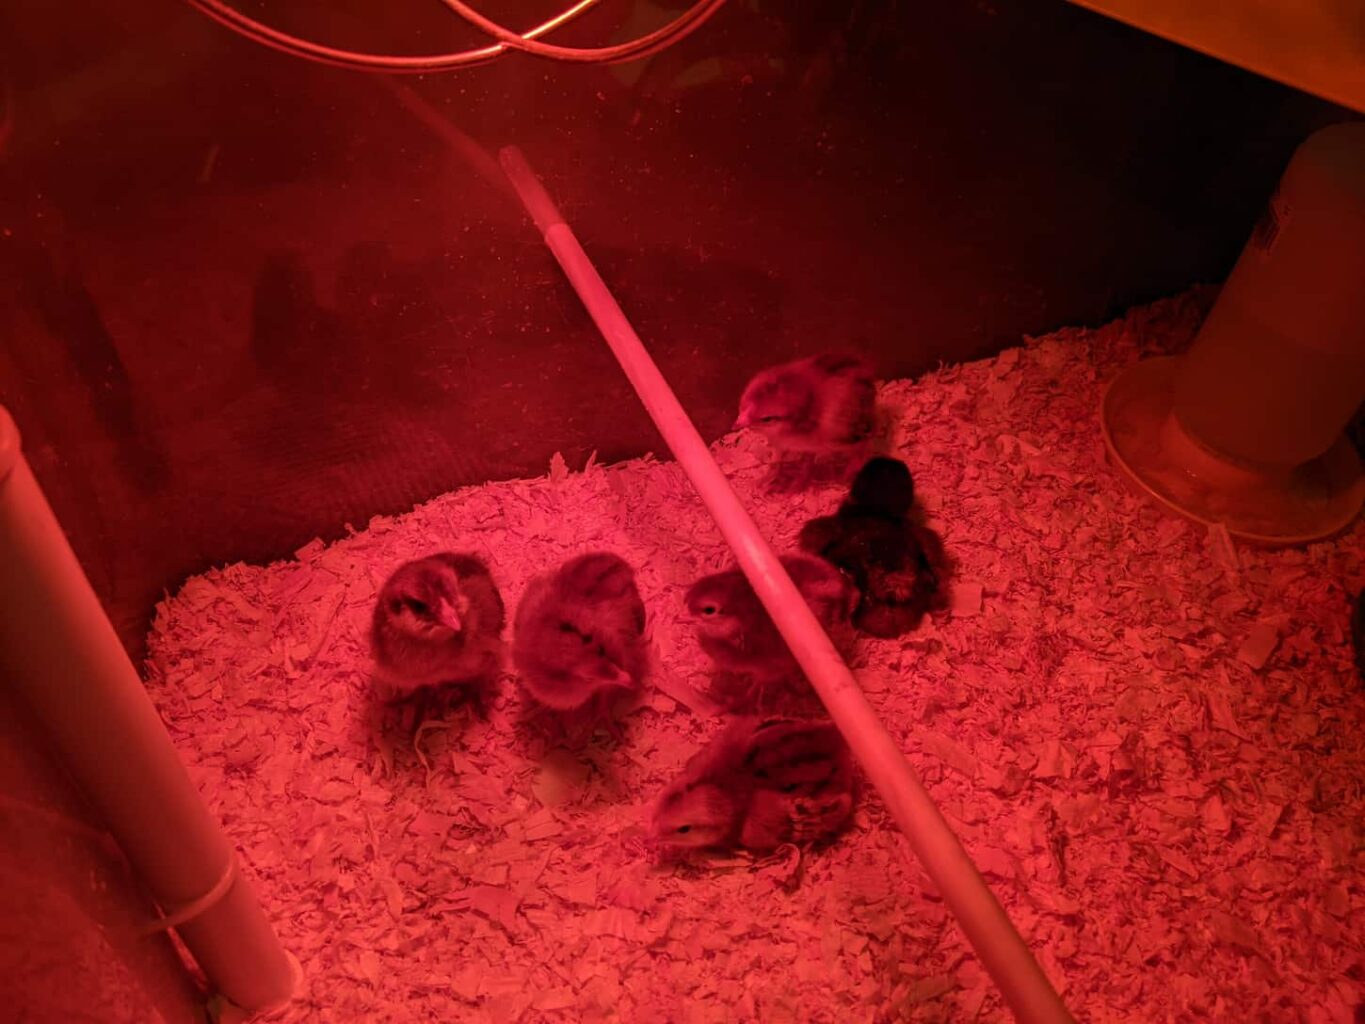 An image of our baby chicks inside a brooder with a waterer and a heat lamp.